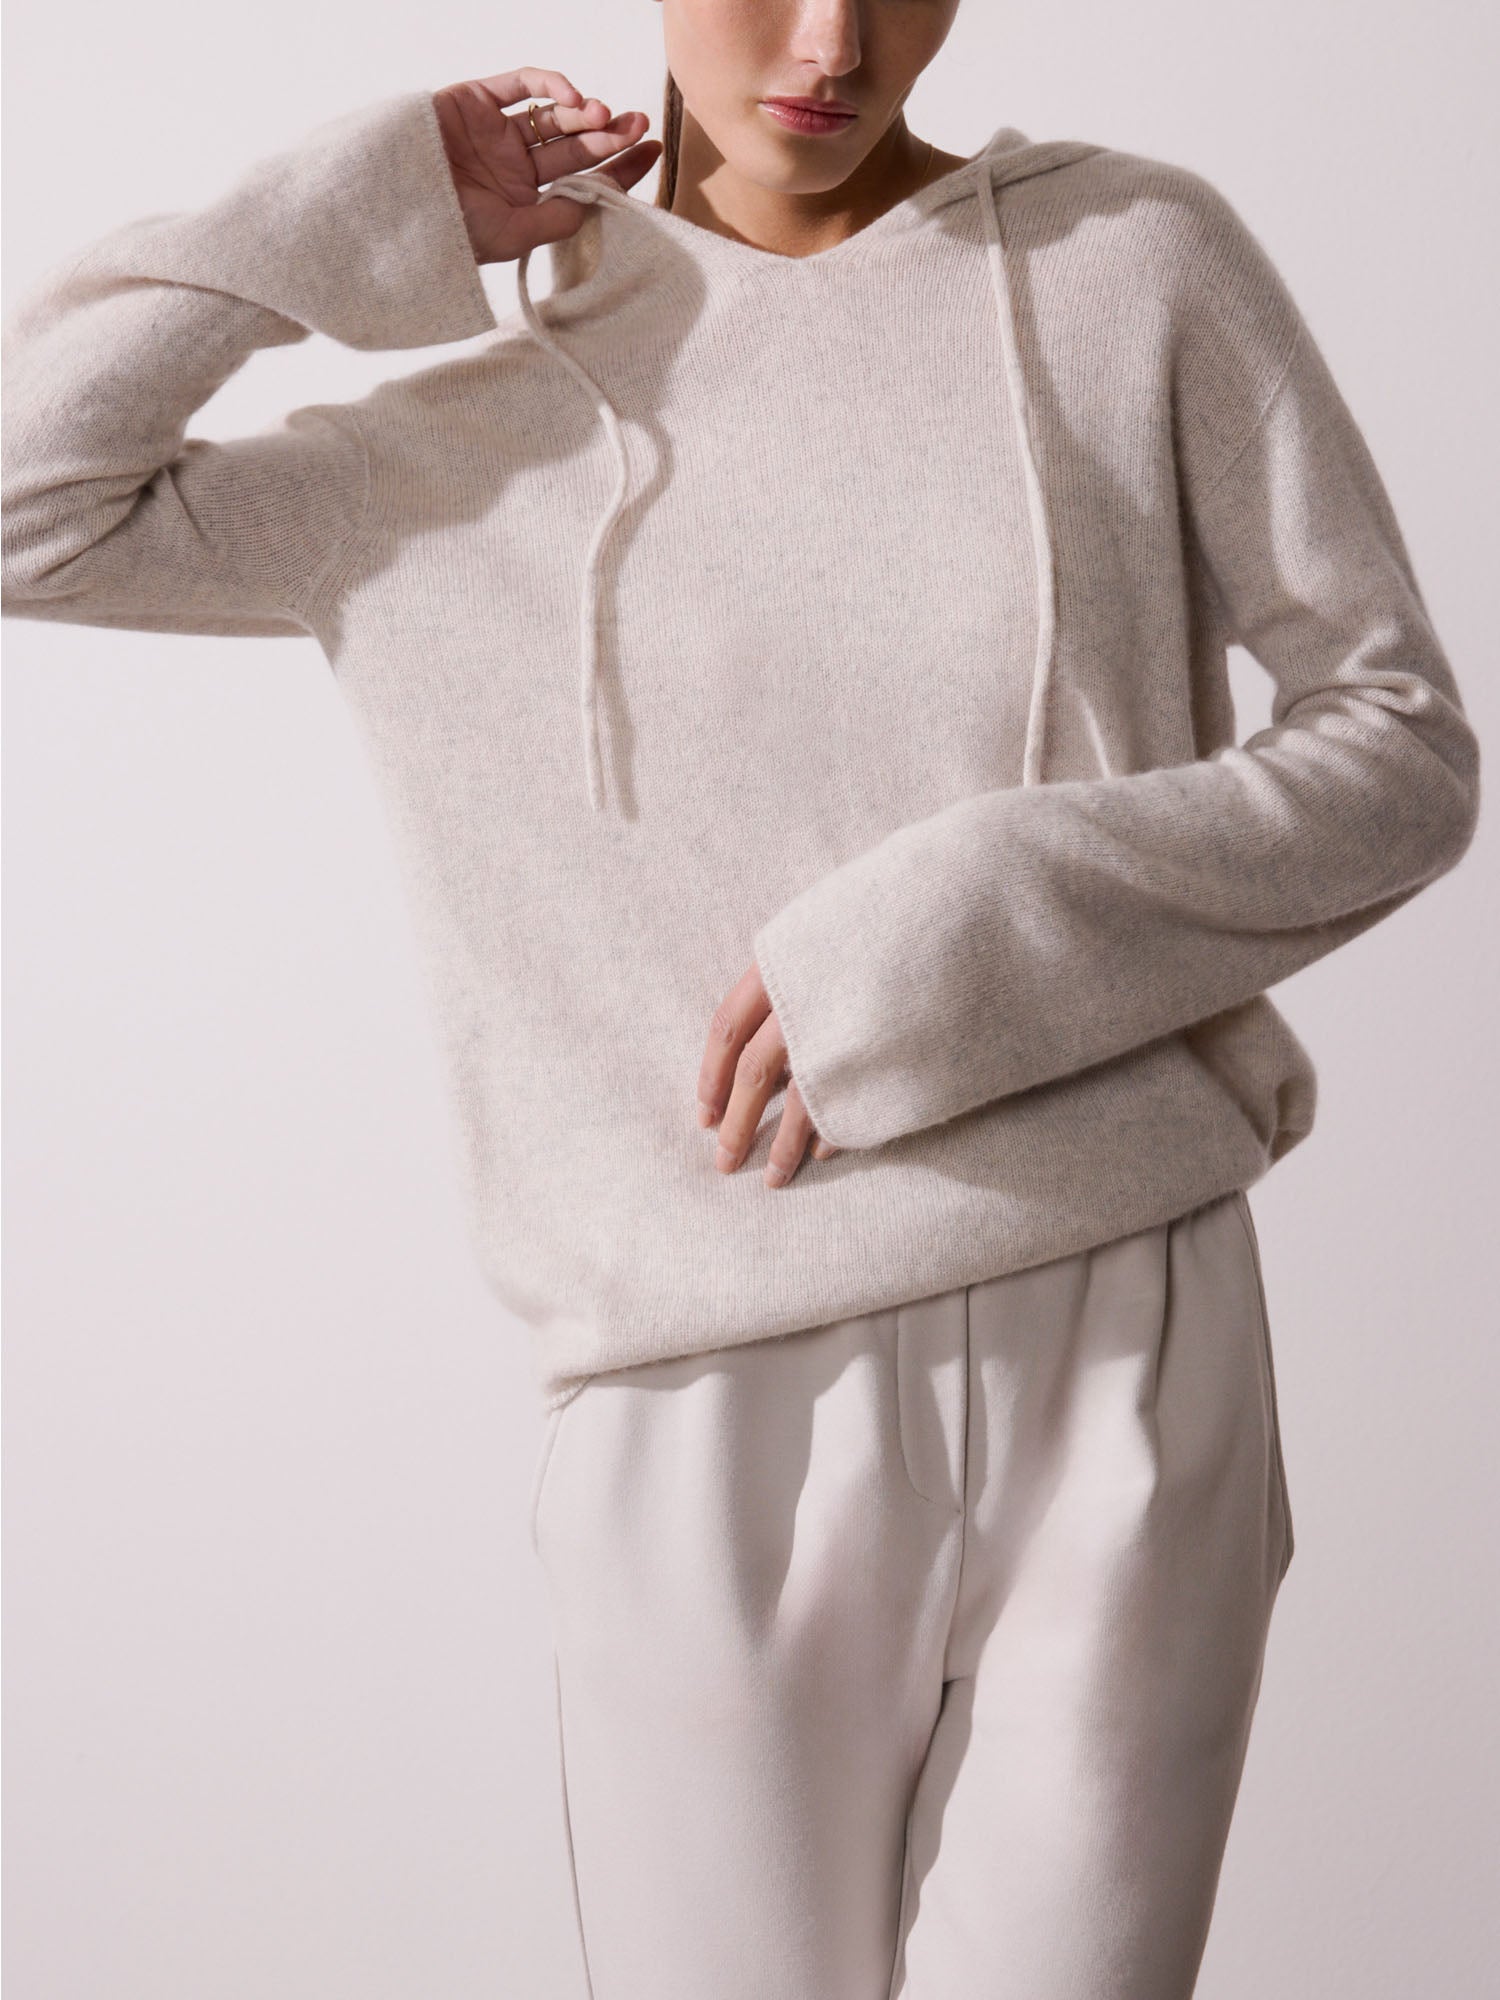 Cashmere beige hoodie sweater front view